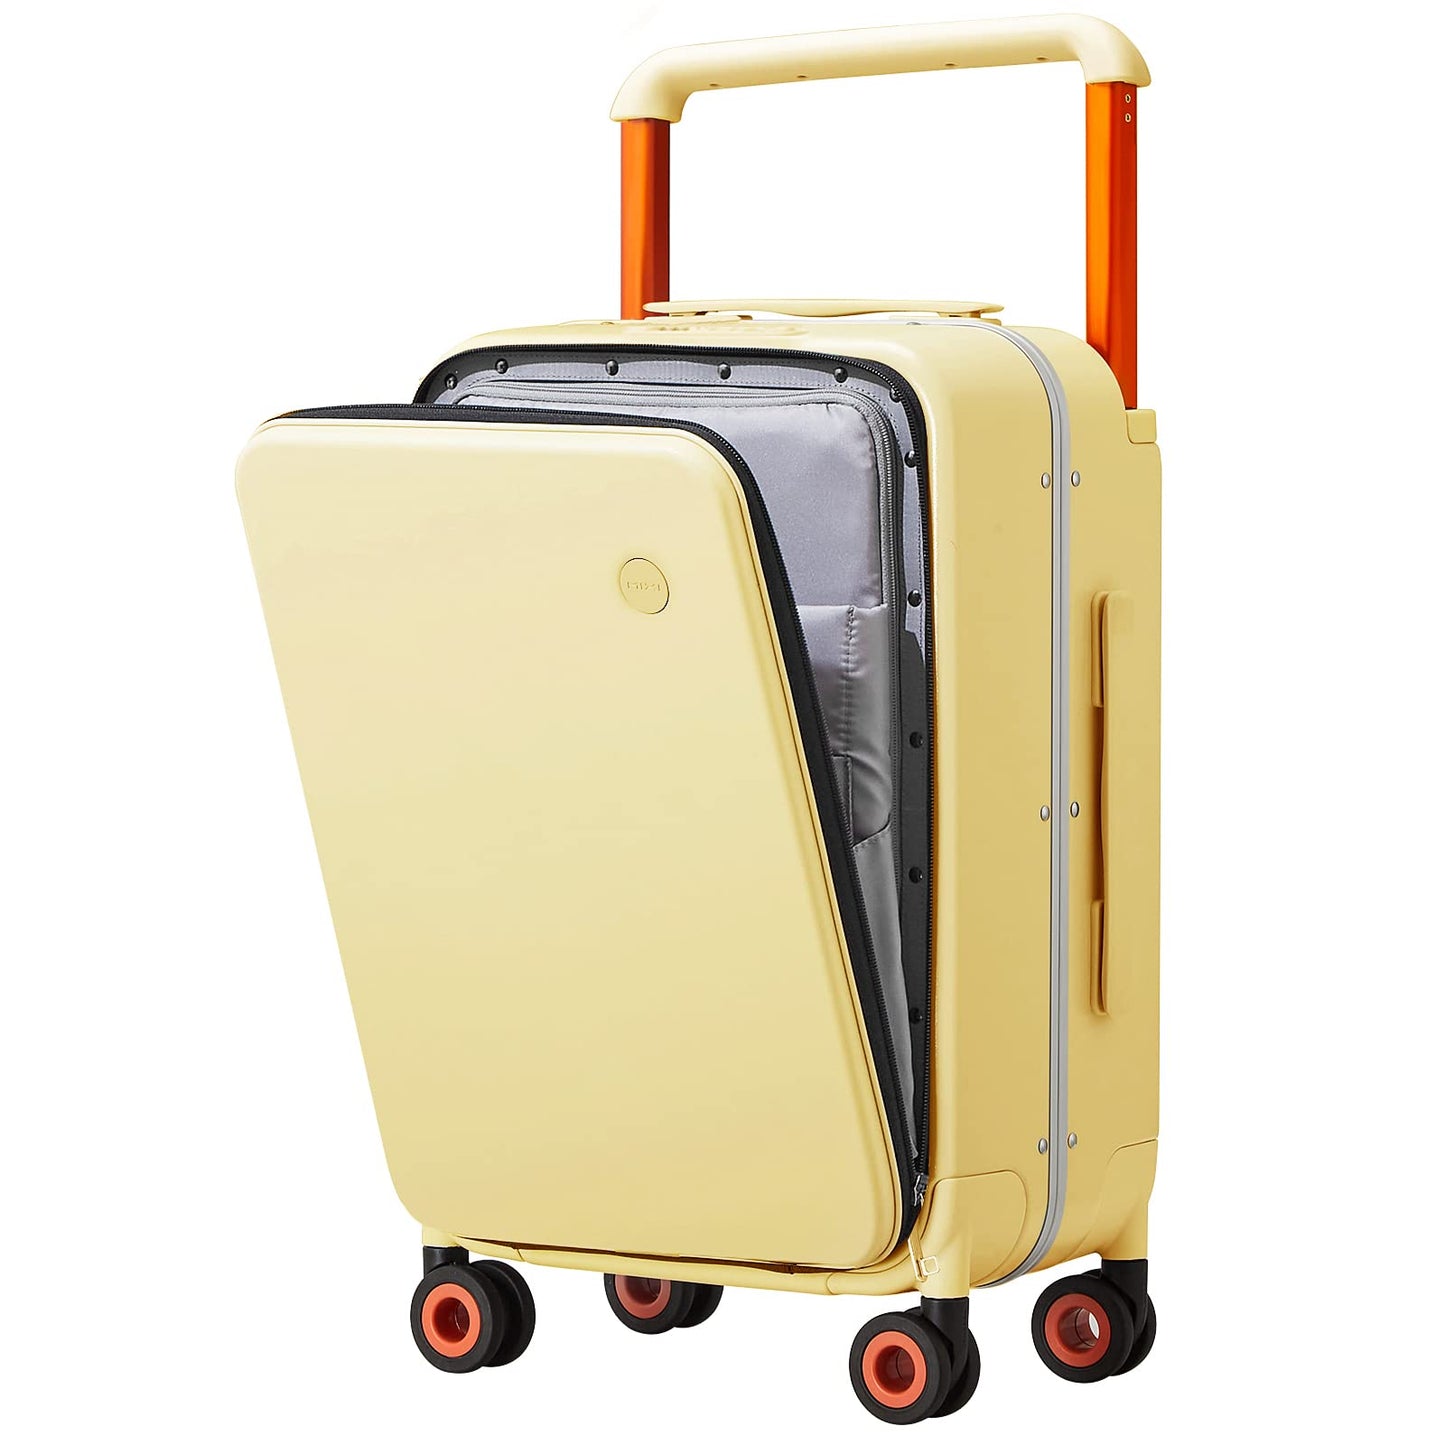 O9 O-Nine Carry On Luggage Wide Handle Luxury Design Rolling Travel Suitcase PC Hardside with Aluminum Frame Hollow Spinner Wheels, with Cover, 20 inch, Lark Yellow